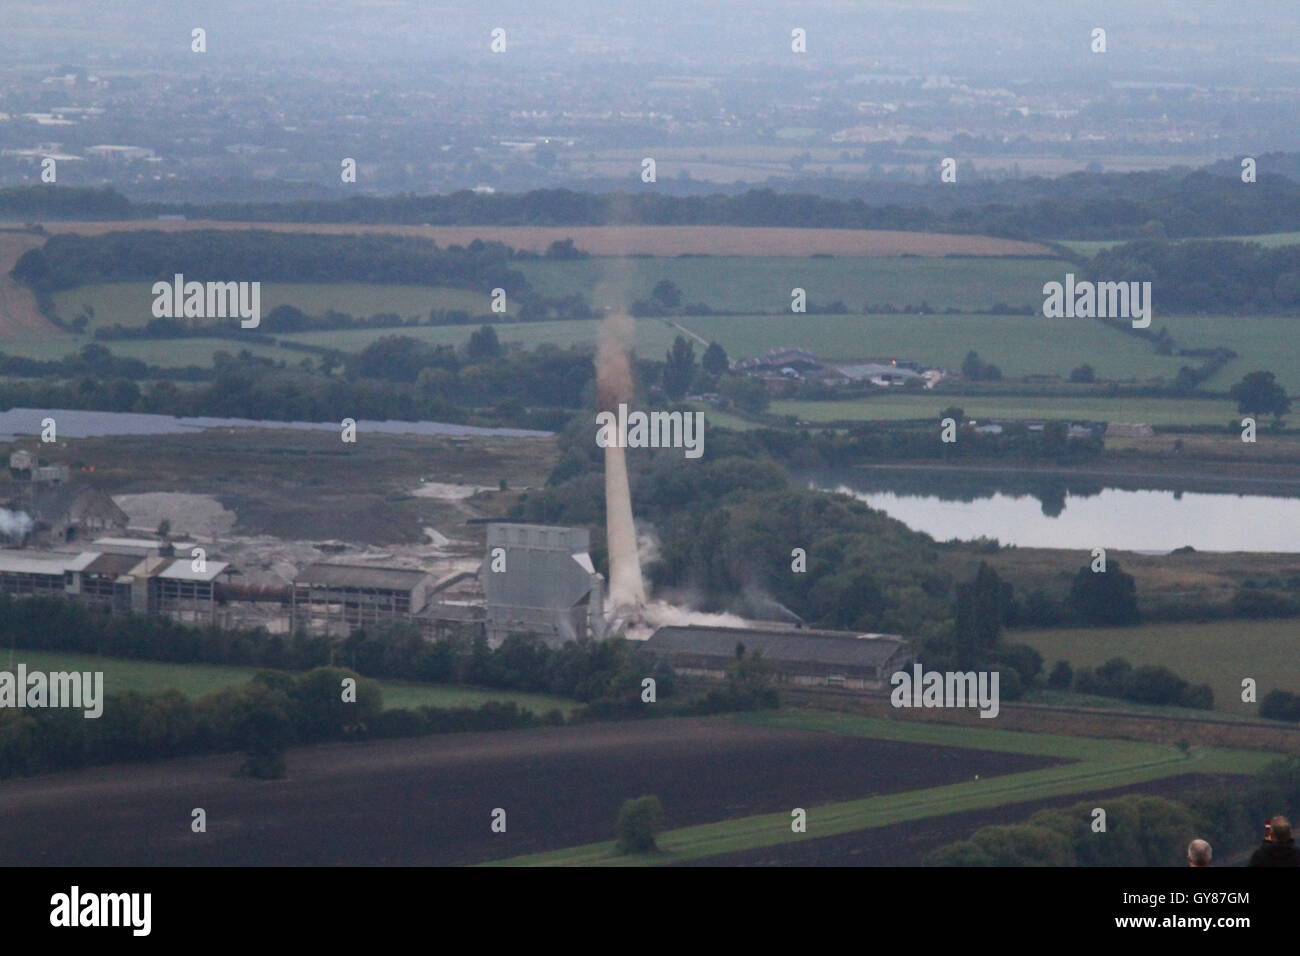 Westbury, UK, 18th Sept, 2016. The 122m high chimney of the westbury cement works, which has been a landmark of the wiltshire skyline since its construction during the 1960's is demolished using 216 charges after being mothballed in 2009.  The demolition comes after over 40 years of cement production at the site. The charges were detonated at 7am by 9 year old local schoolgirl Lilly Sargent after winning a drawing competition hosted by site owner Tarmac. Daniel Crawford / Alamy Live News Stock Photo